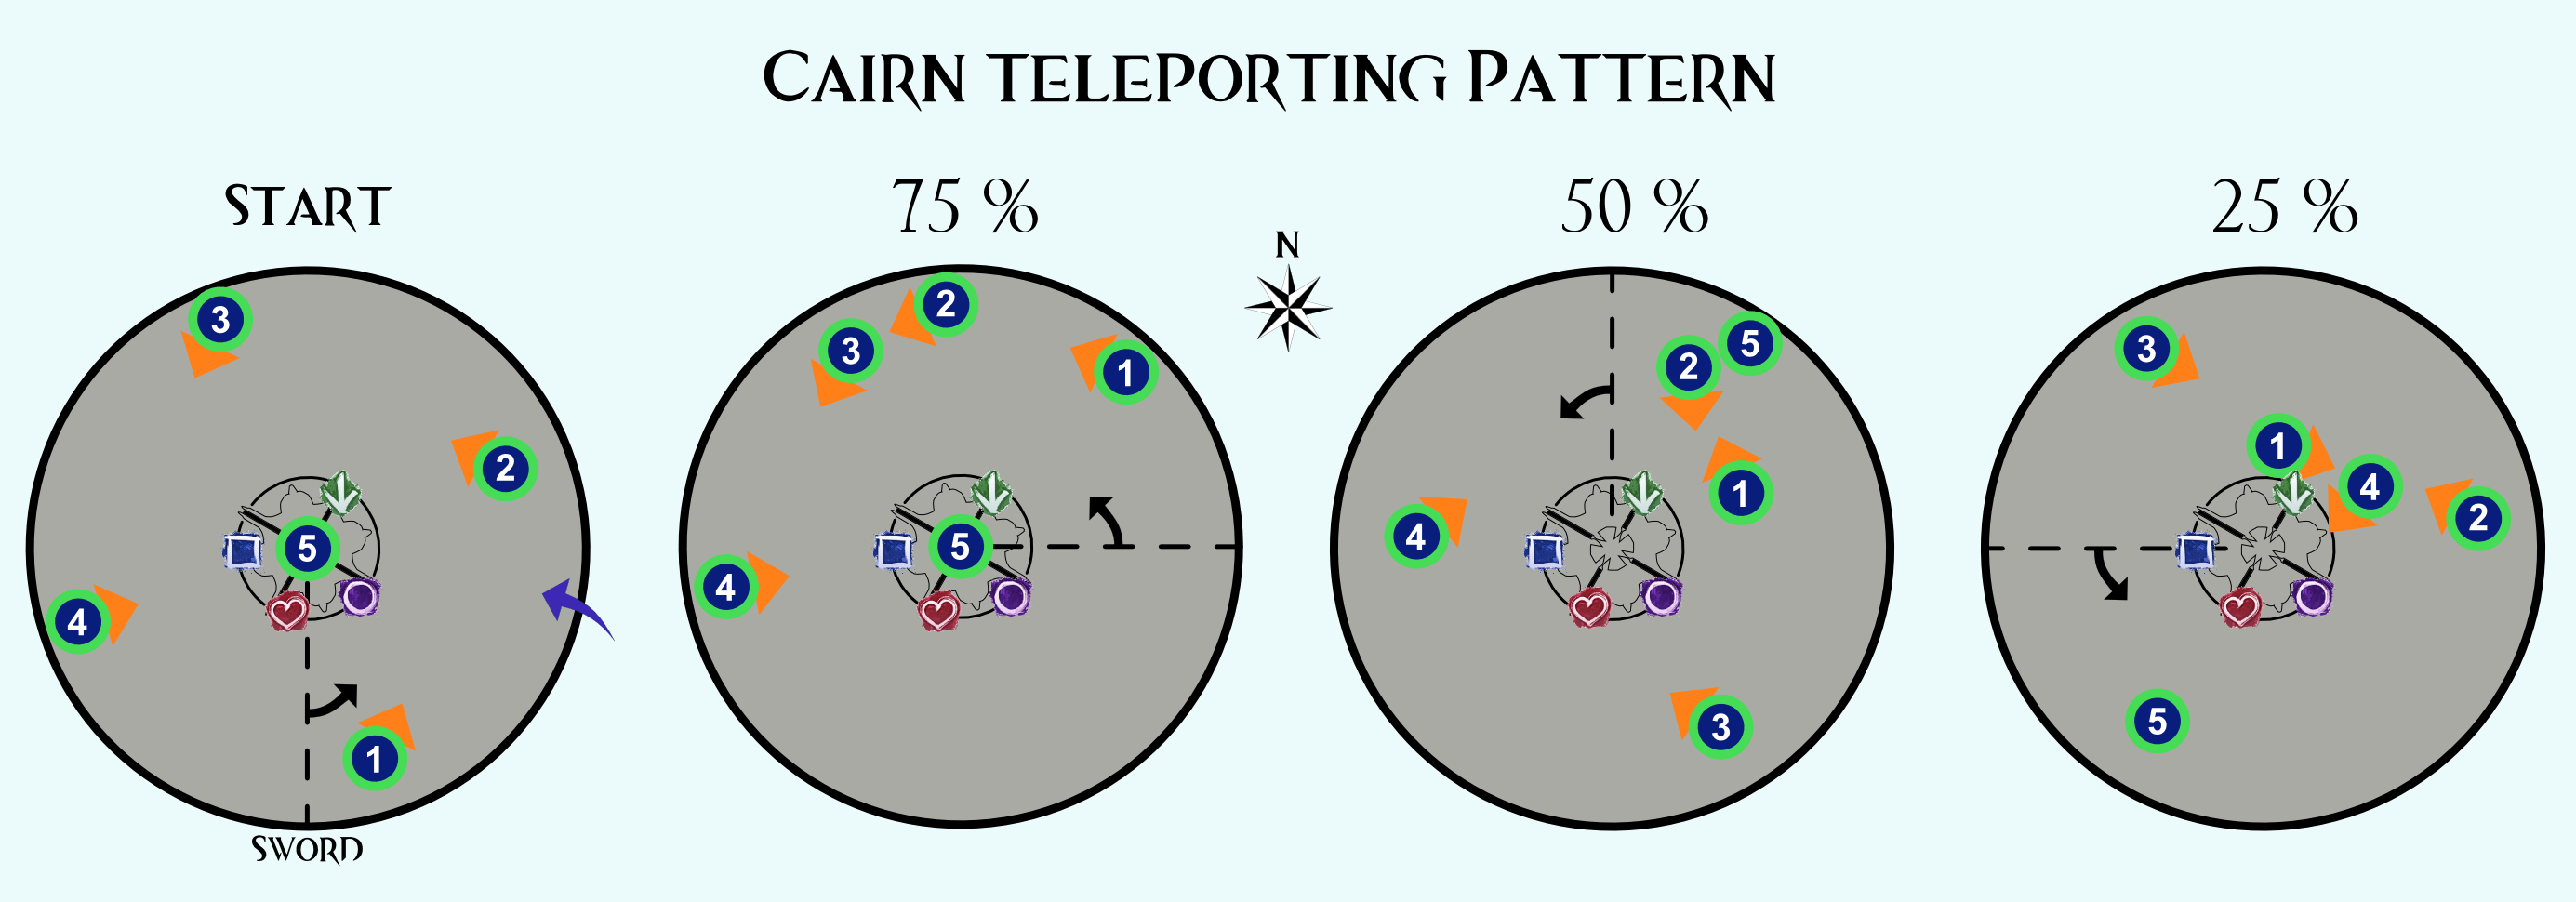 Cairn Teleporting Pattern.png